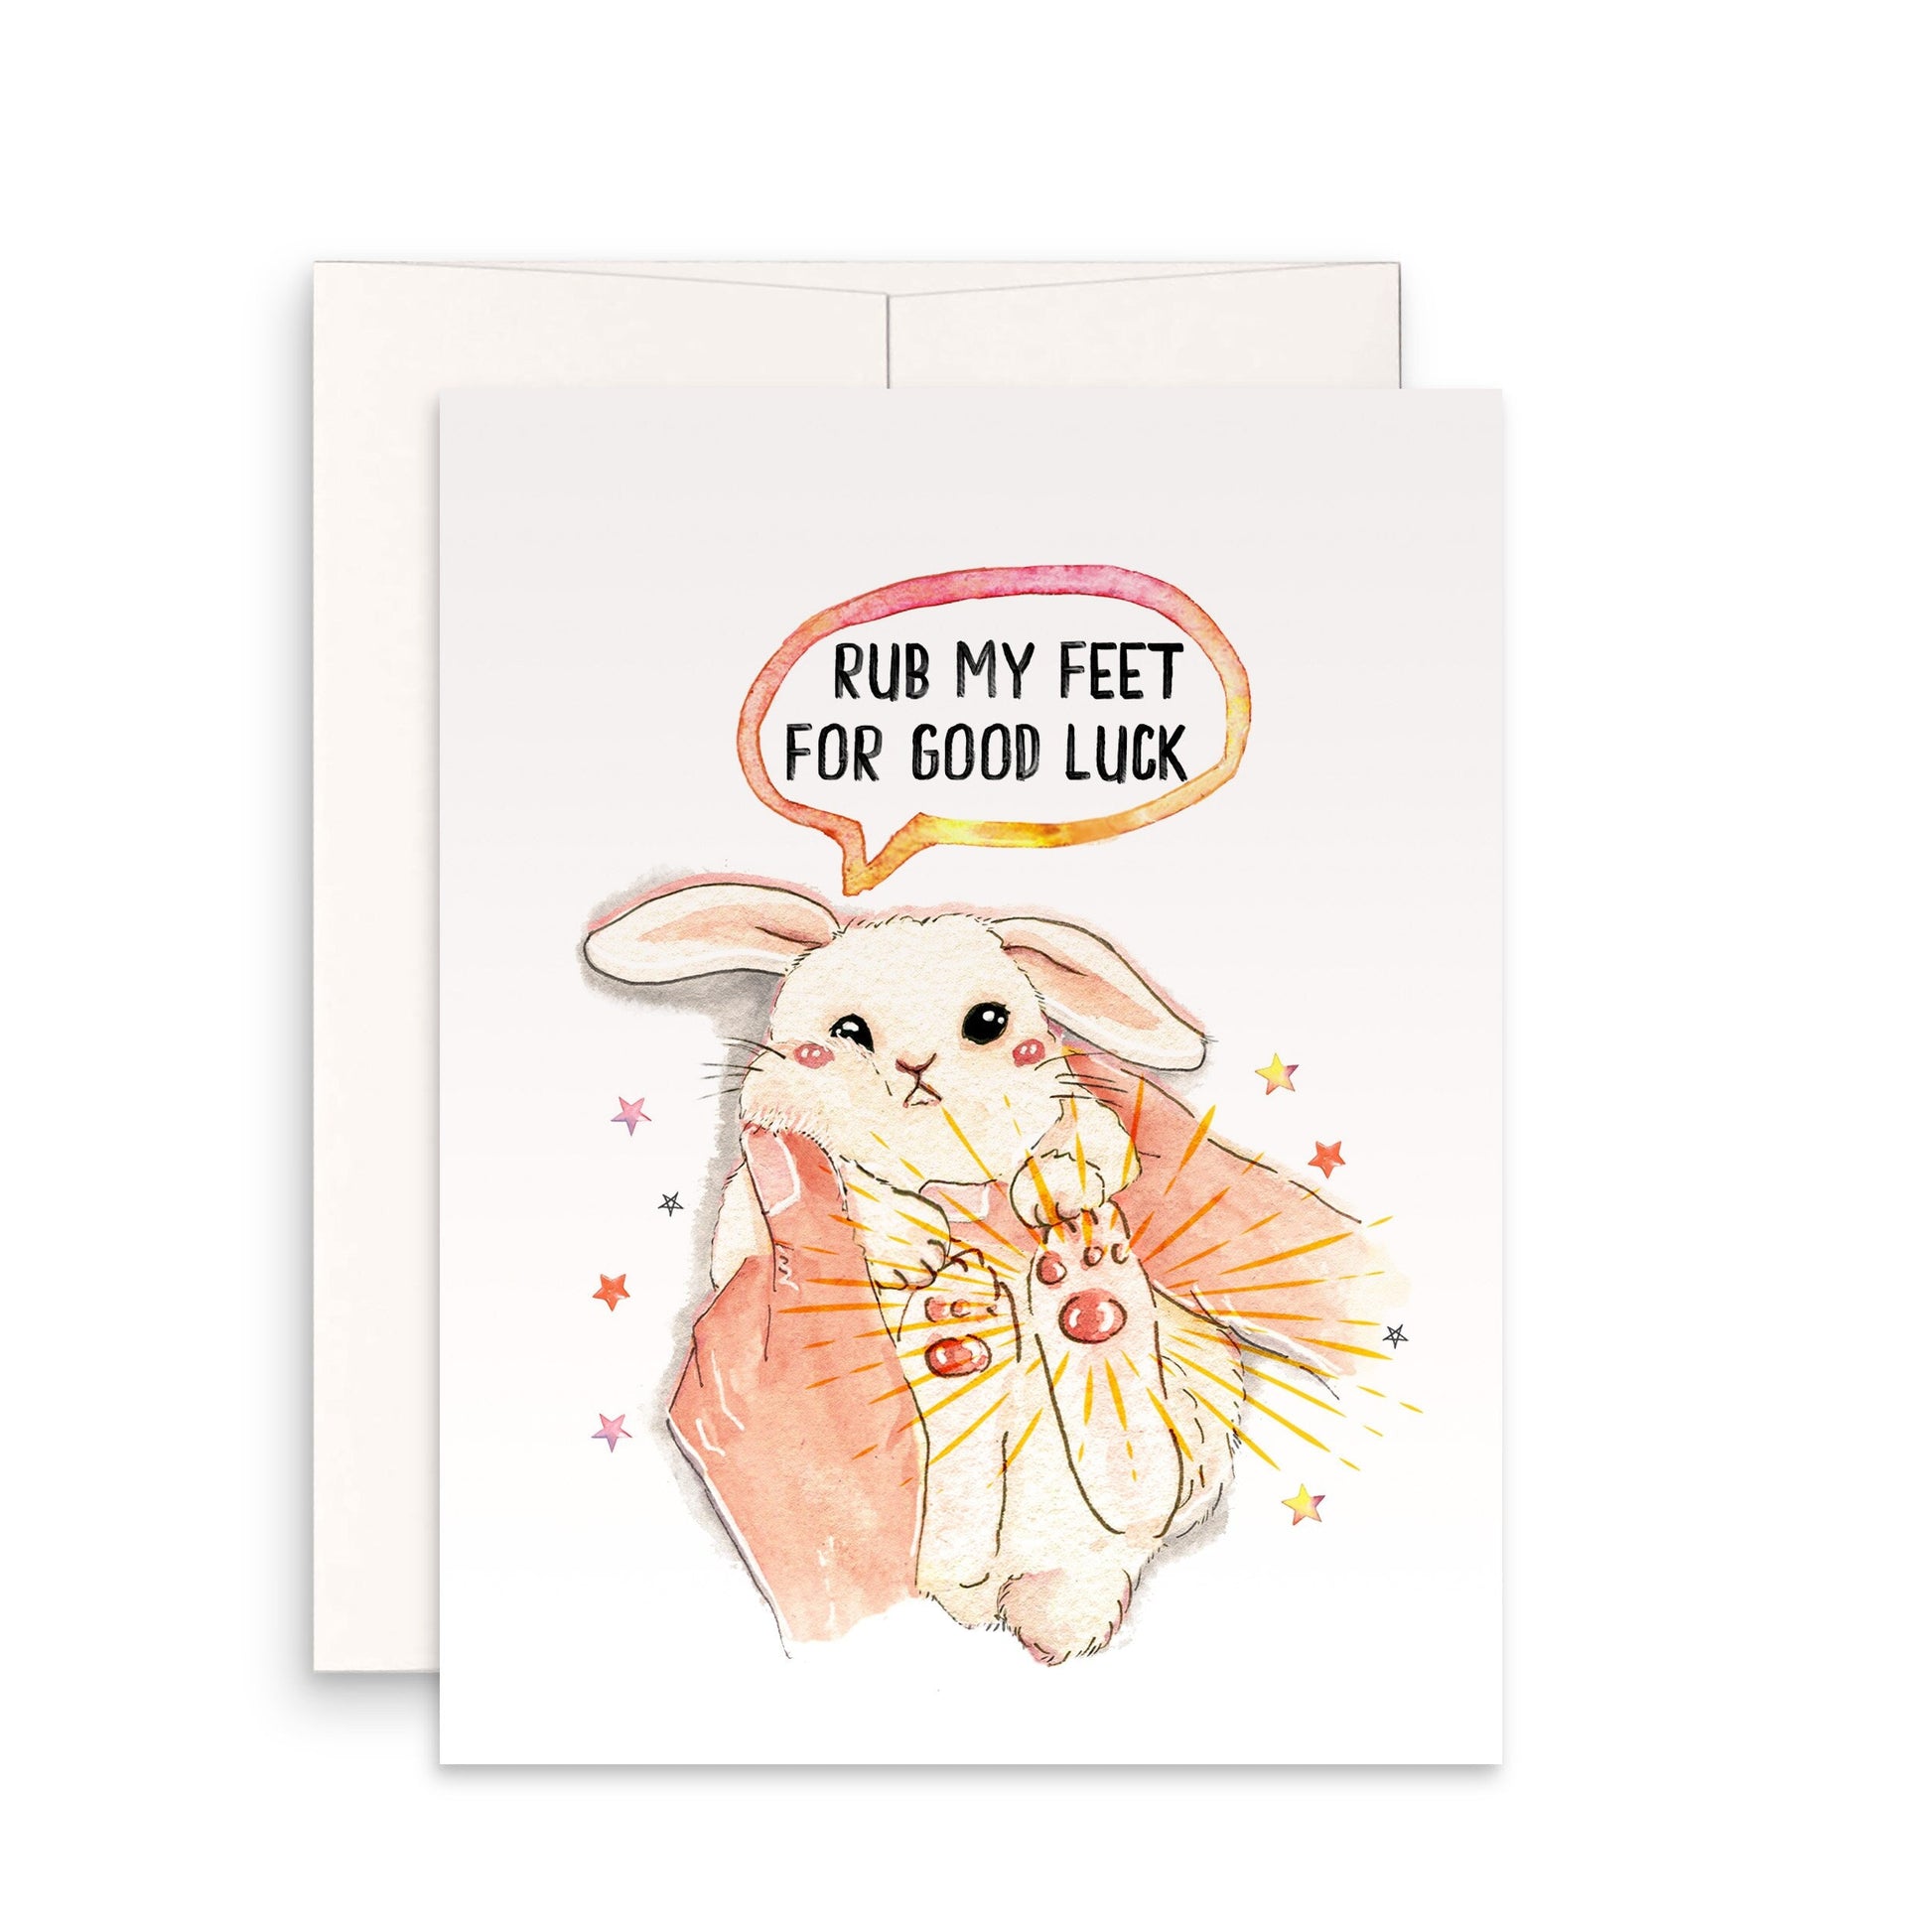 Lucky Bunny Feet Good Luck Cards For Best Friends -Rabbits Foot Lucky Gift - Funny Encouragement Cards